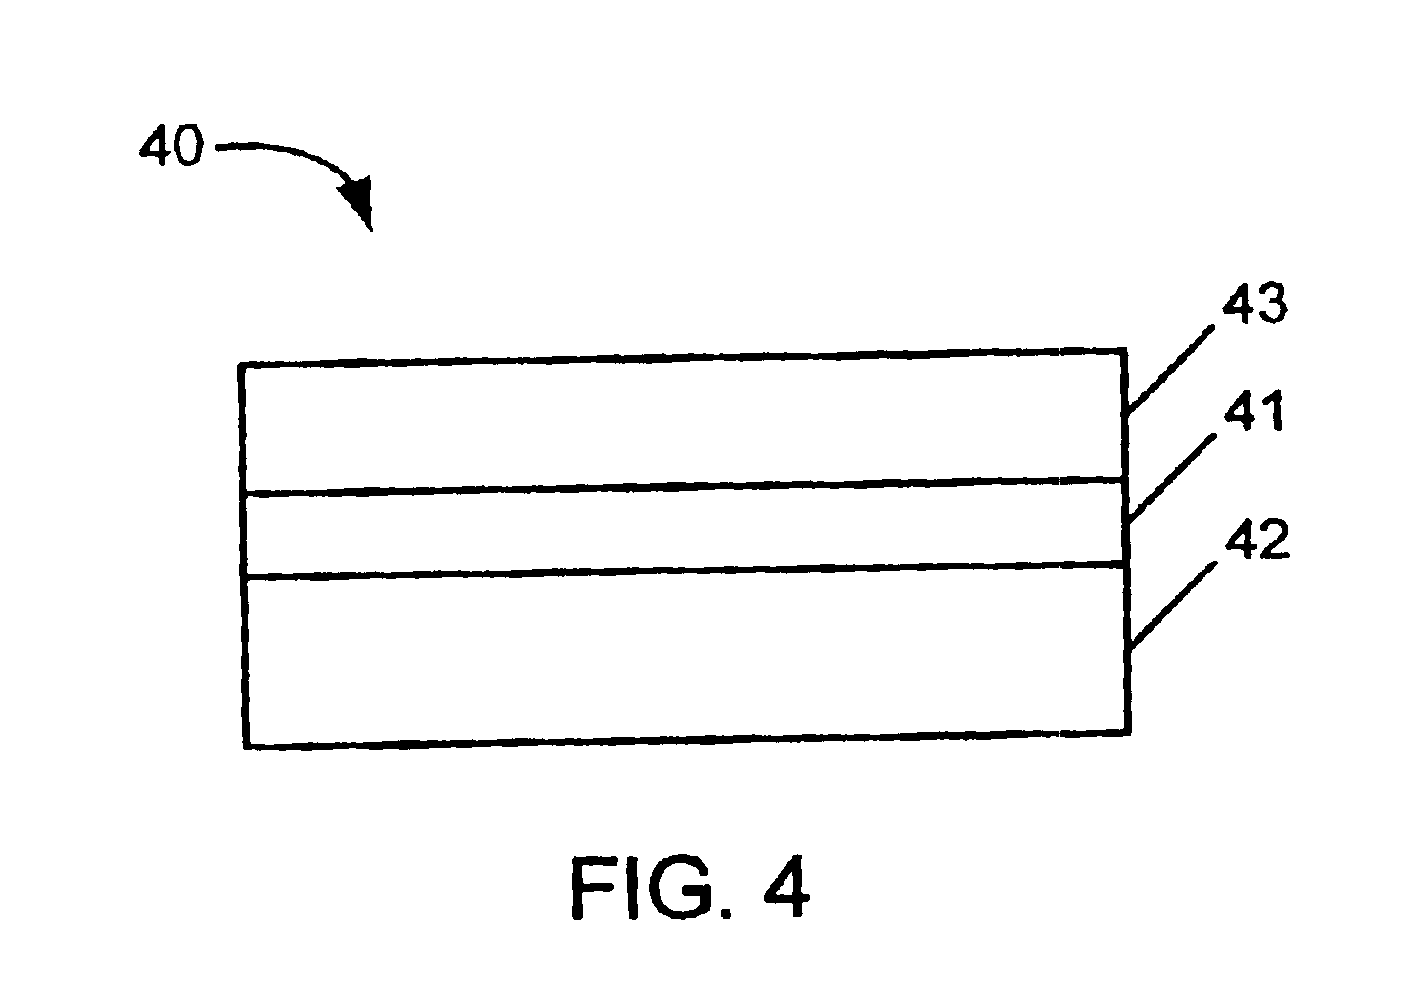 Topcoat compositions, substrates containing a topcoat derived therefrom, and methods of preparing the same